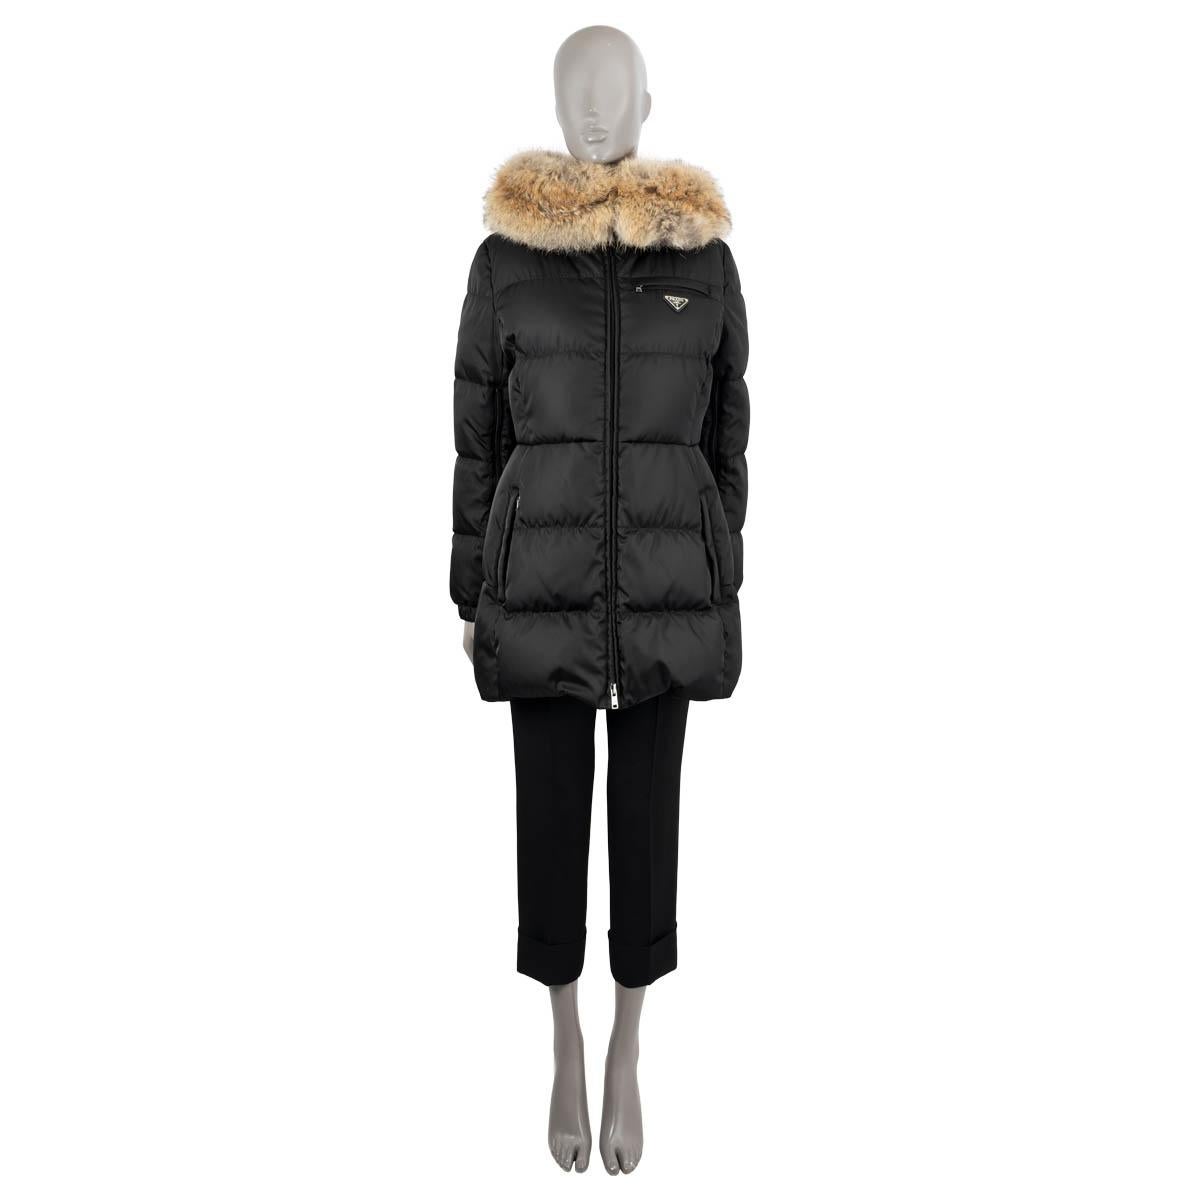 100% authentic Prada quilted down parka in black polyamide (100%). Features a natural coyote fur trim along the hood, side slit zip-pockets, zipped chest-pocket, two internal zip-pockets and zipper on the inner sleeve. Opens with a two-way zipper.